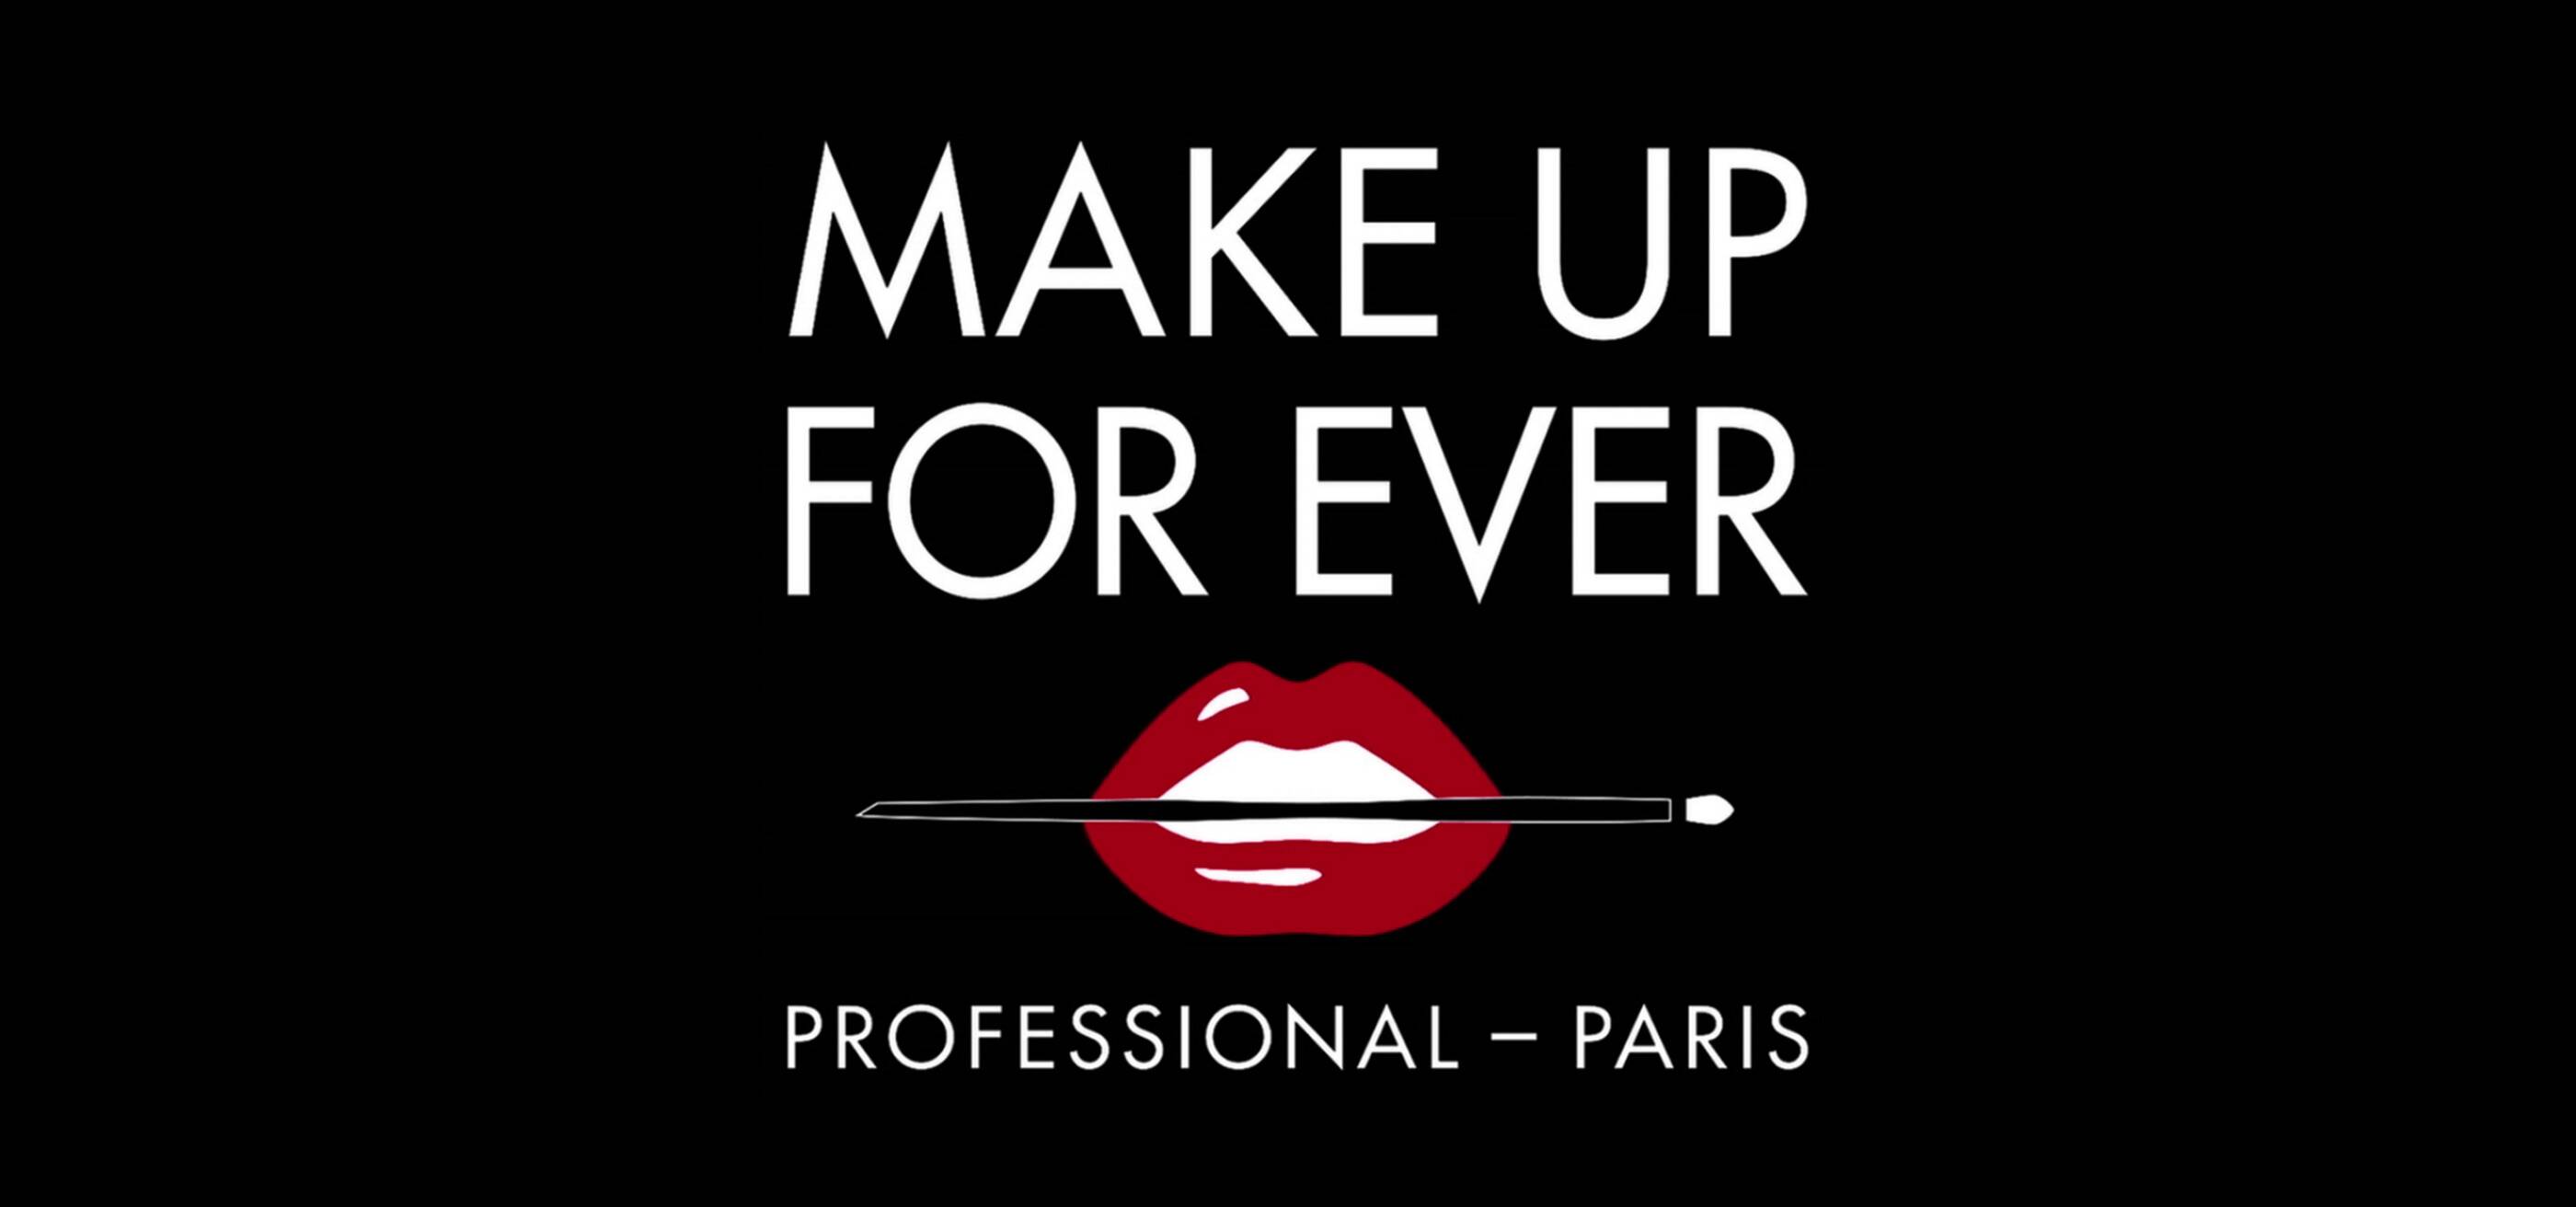 Make Up For Ever, professional makeup - Perfumes & Cosmetics - LVMH